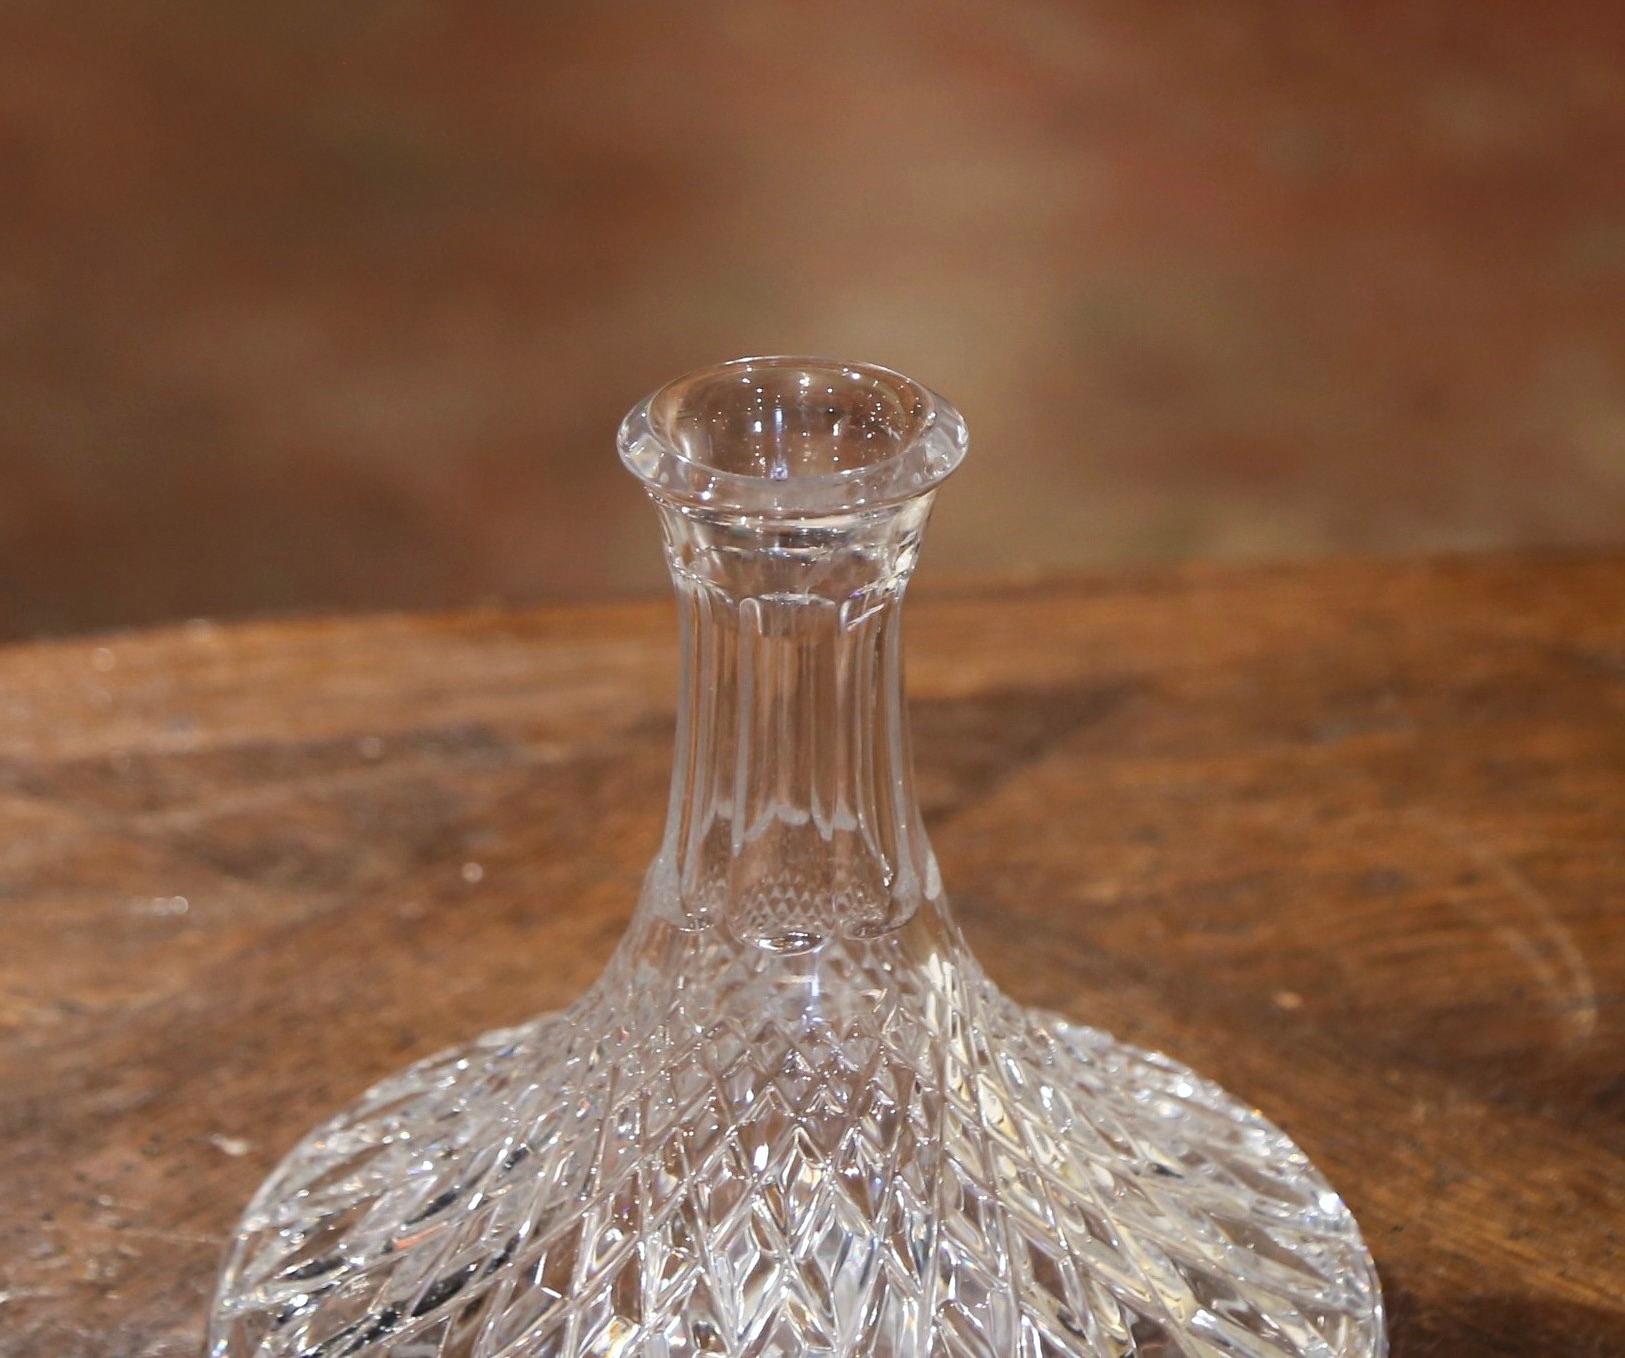 Hand-Crafted Midcentury French Cut Glass Wine Decanter with Stopper